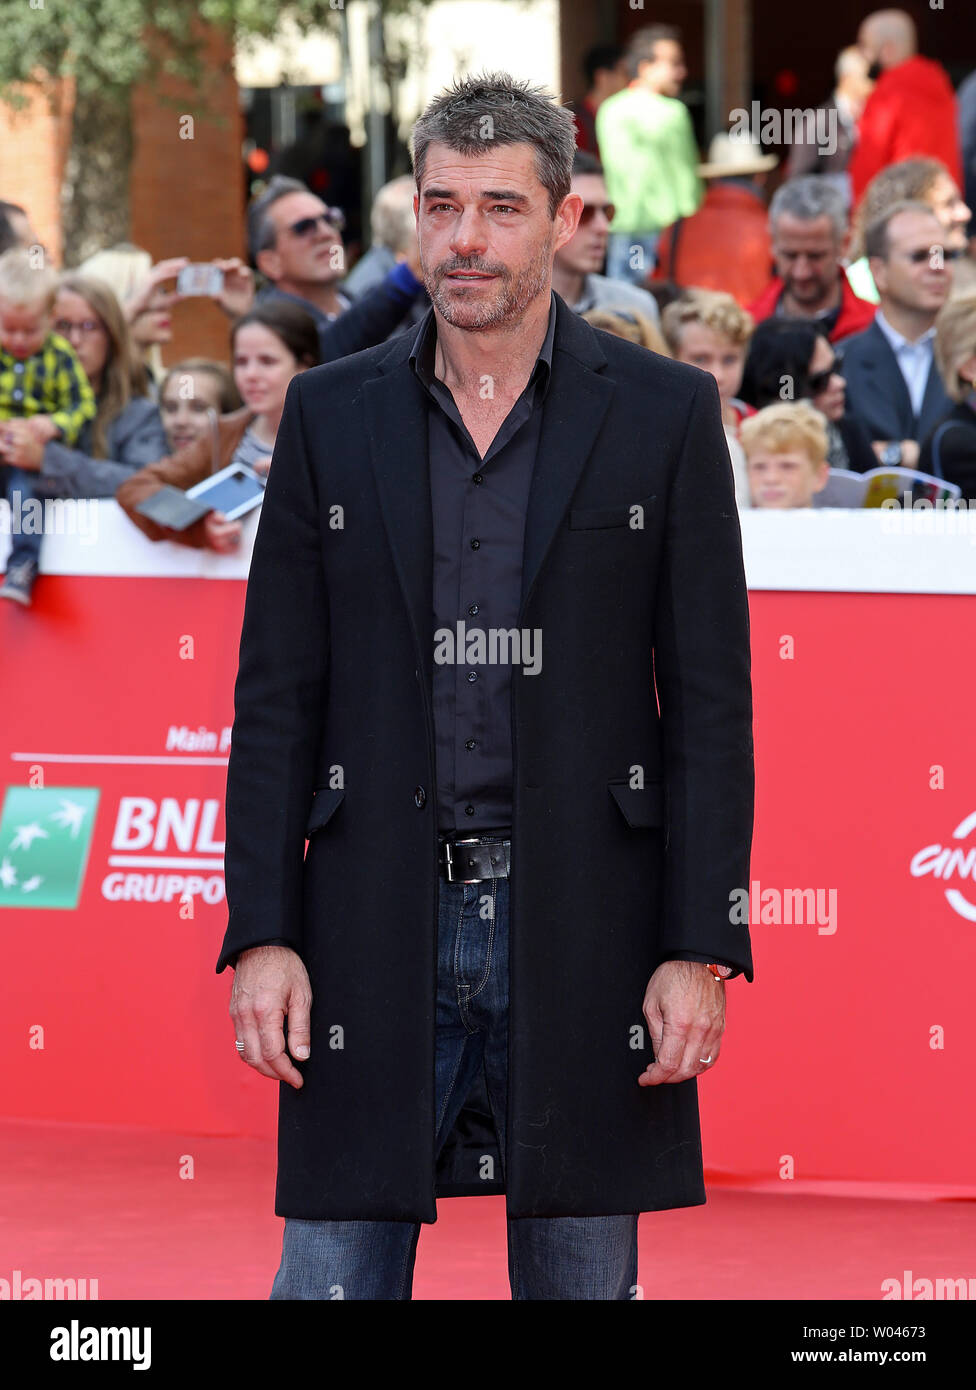 Thierry Neuvic arrives on the red carpet before the screening of the film 'Belle et Sebastien, l'aventure continue' at the 10th annual Rome International Film Festival in Rome on October 17, 2015.   UPI/David Silpa Stock Photo